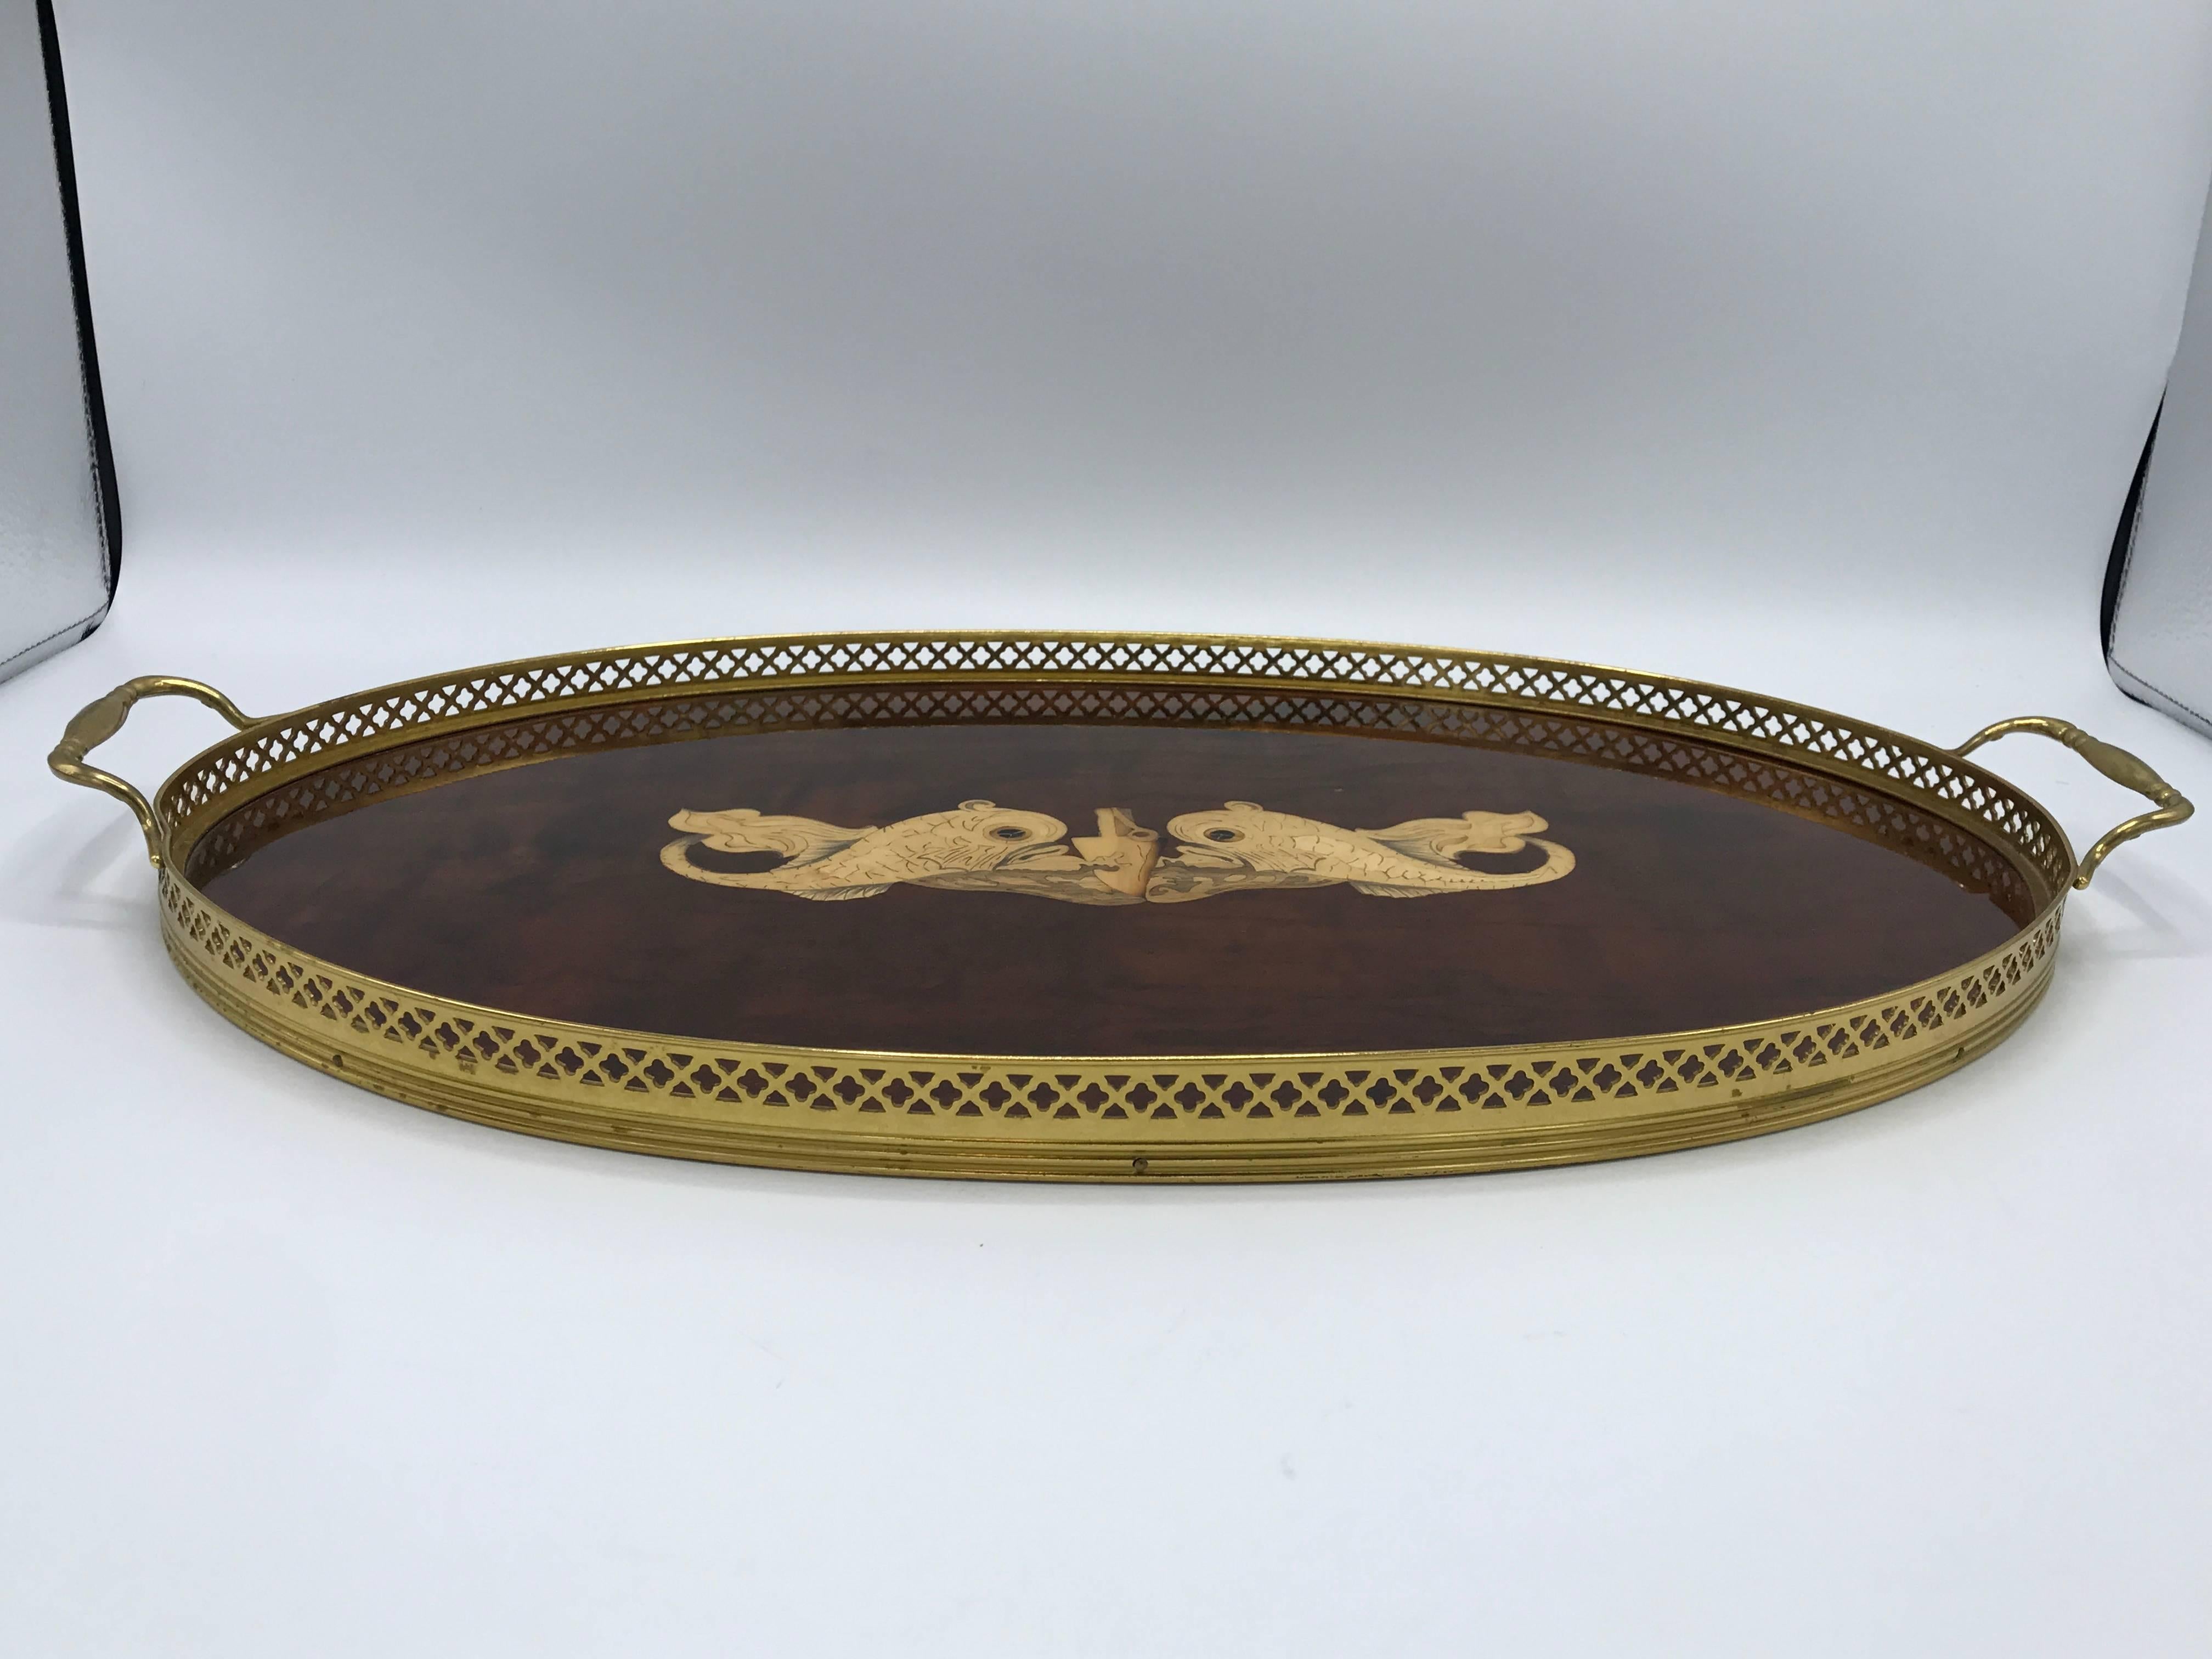 Offered is an exquisite, 1950s Italian inlaid serving tray. The piece has a gorgeous inlaid koi fish motif and is complimented by a brass gallery wall with handles. Lacquered.